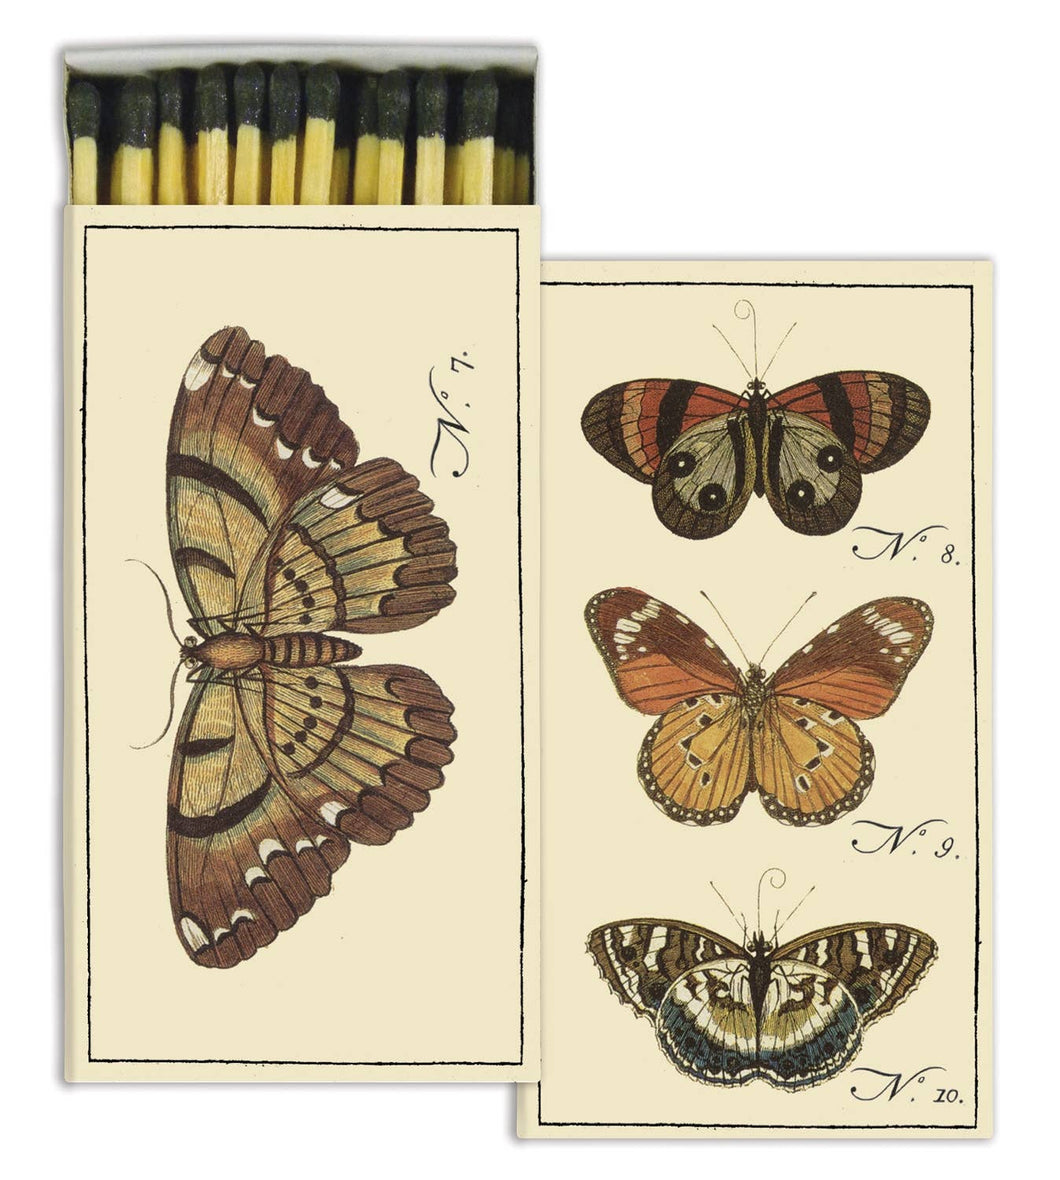 Matches - Insect - Butterfly